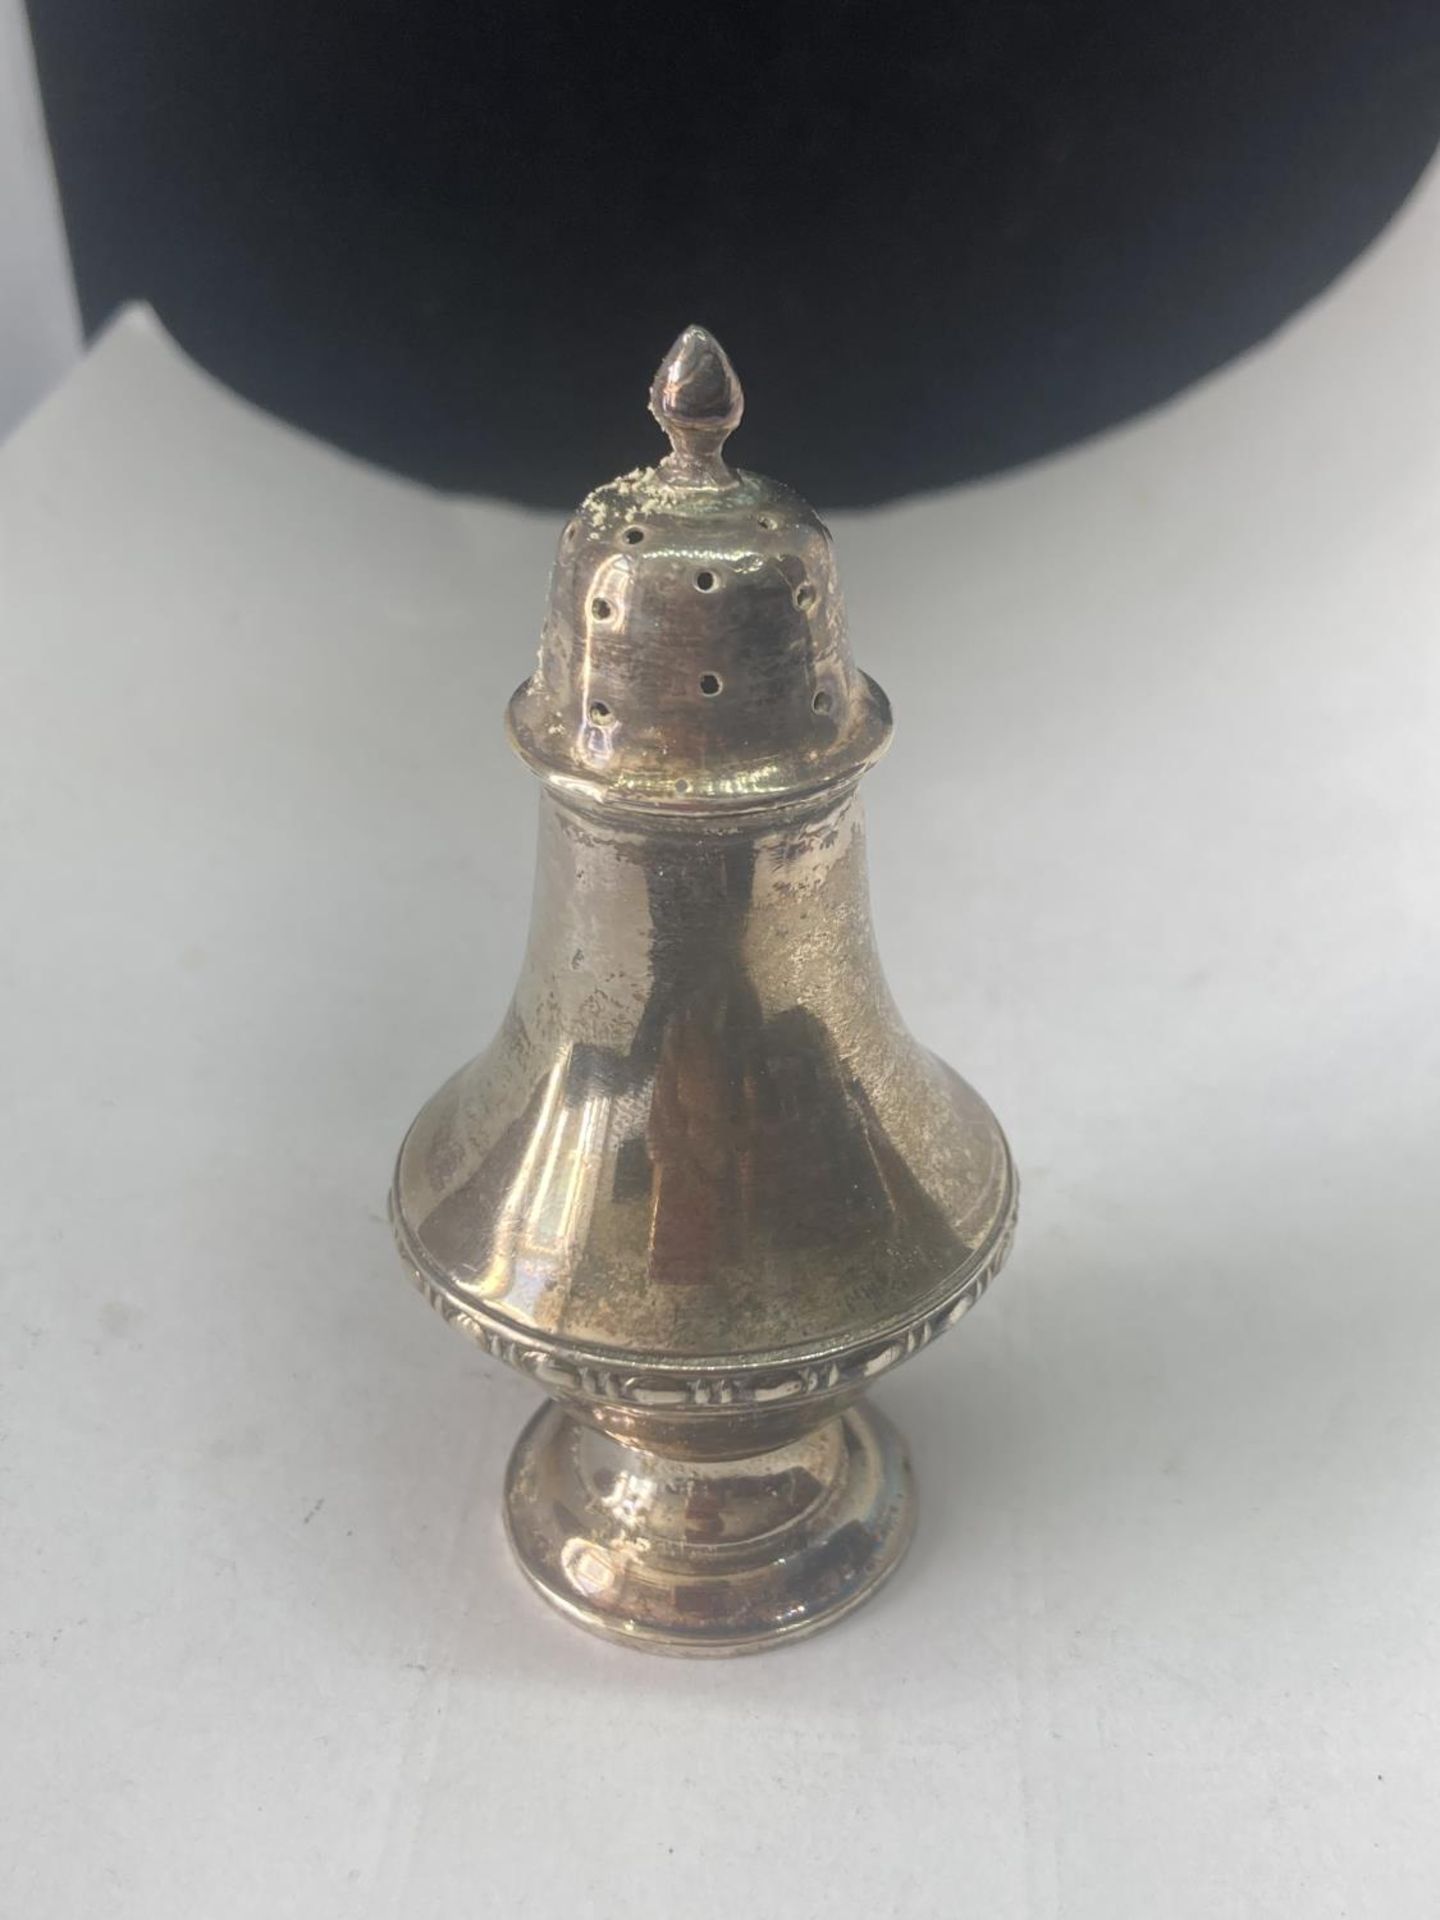 A HALLMARKED CHESTER SILVER PEPPER POT GROSS WEIGHT 47.5 GRAMS - Image 2 of 6